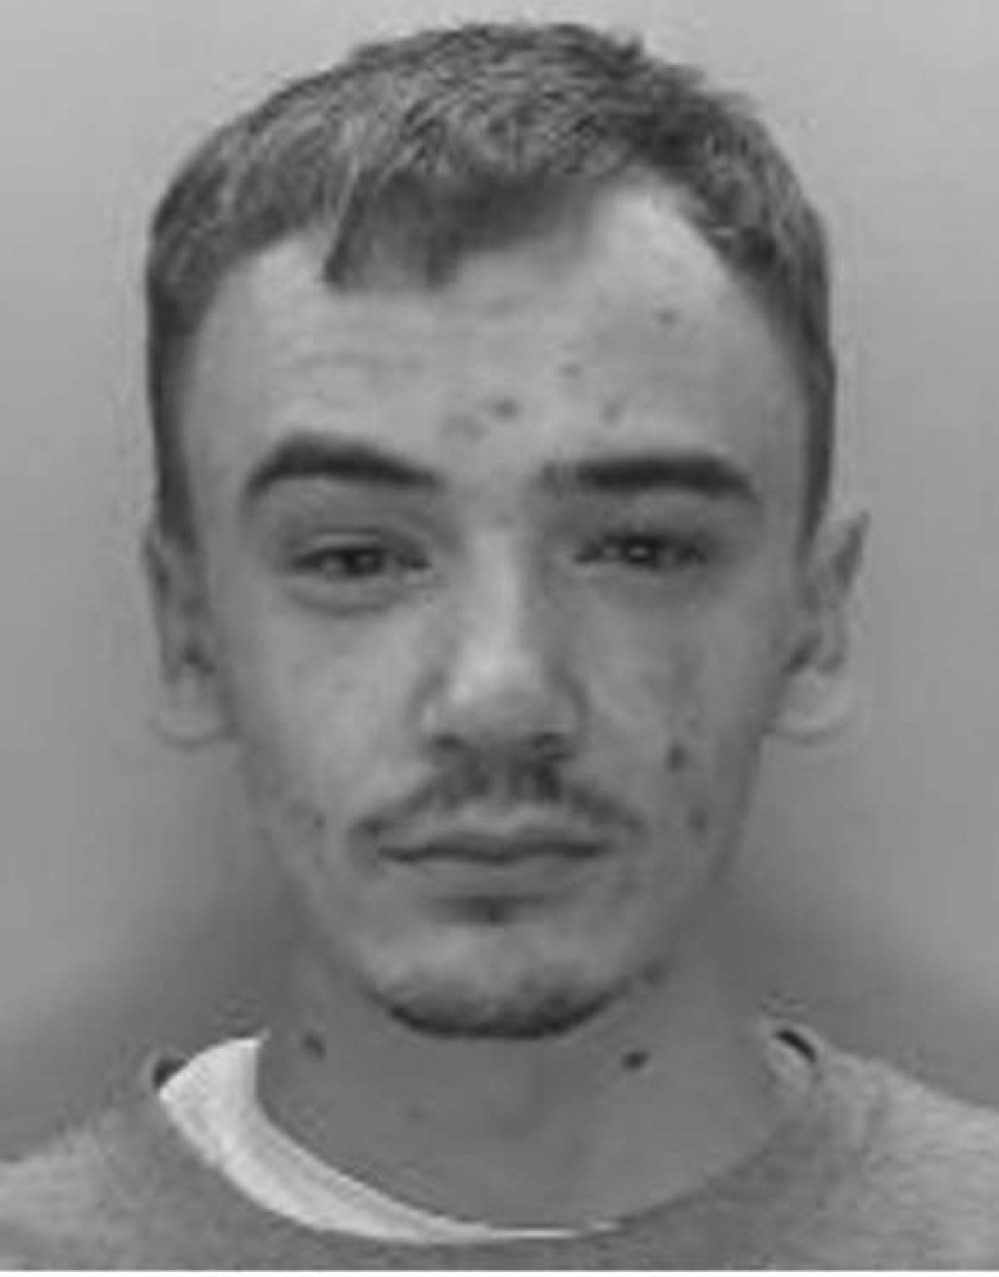 Kyle Briggs was reported missing from the Hucknall area just after midday. Photo courtesy of Nottinghamshire Police.